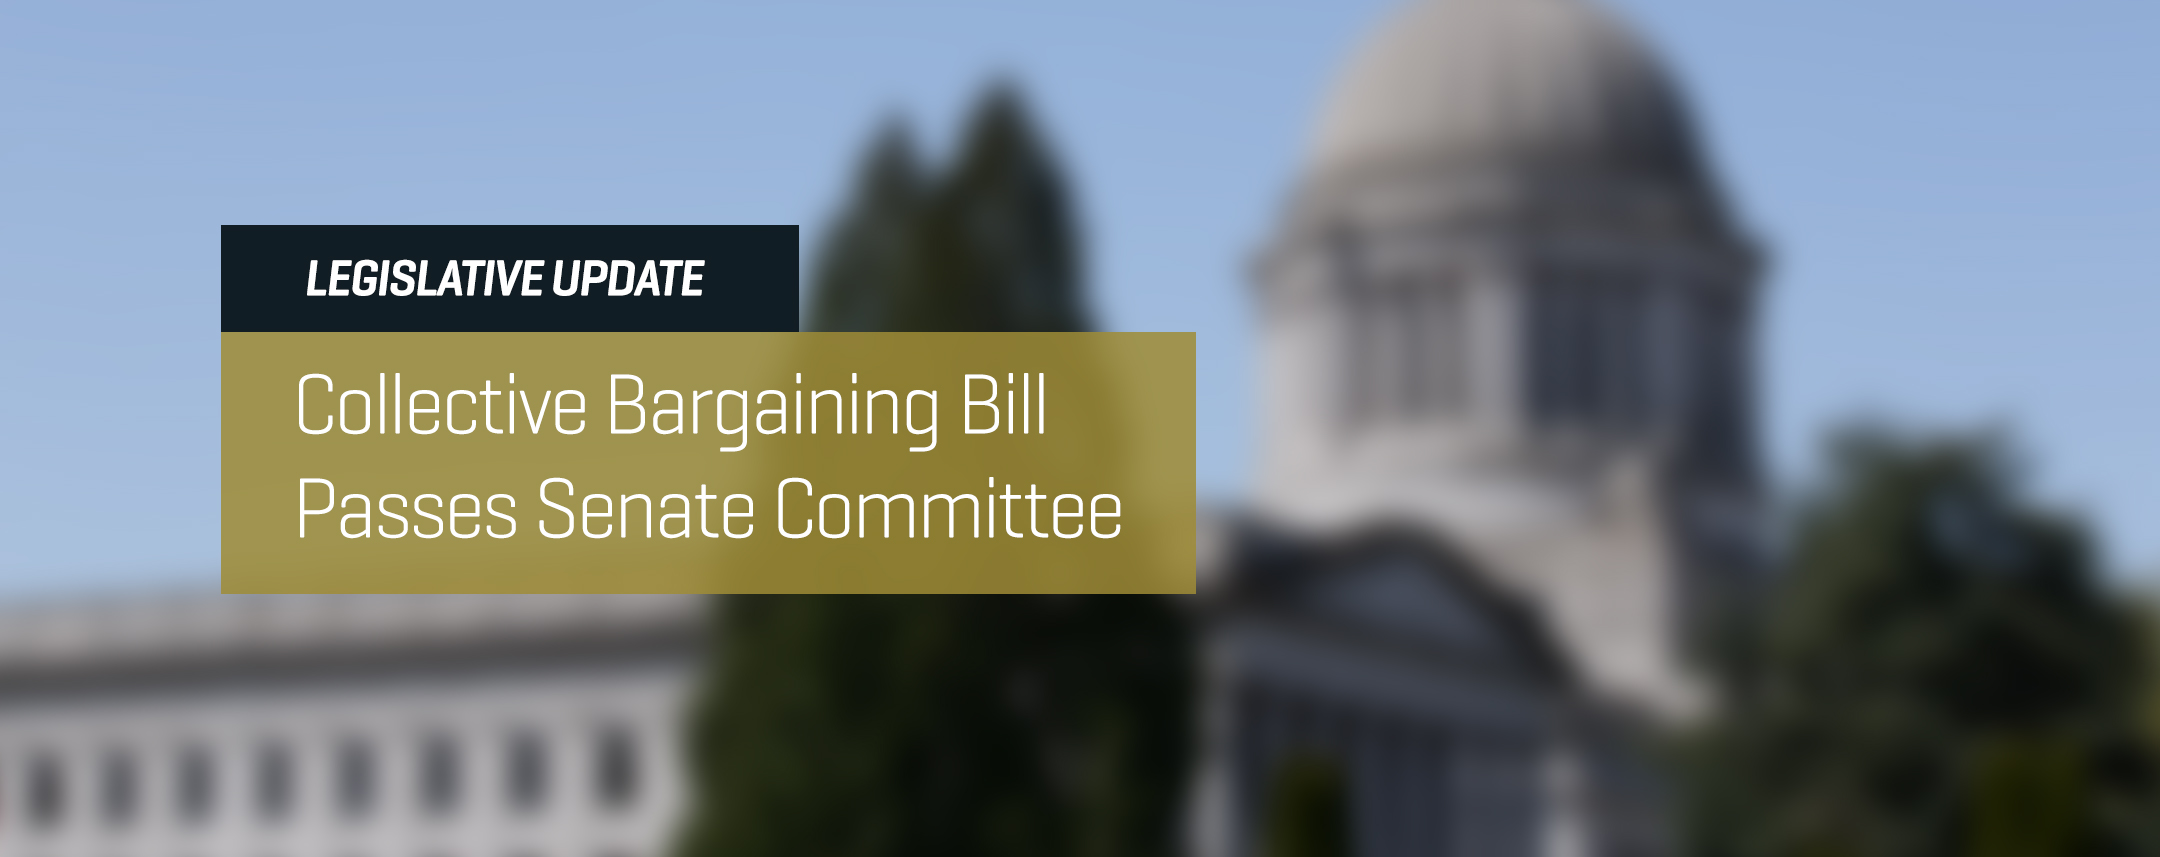 Collective-Bargaining-Bill-FEATURED.jpg